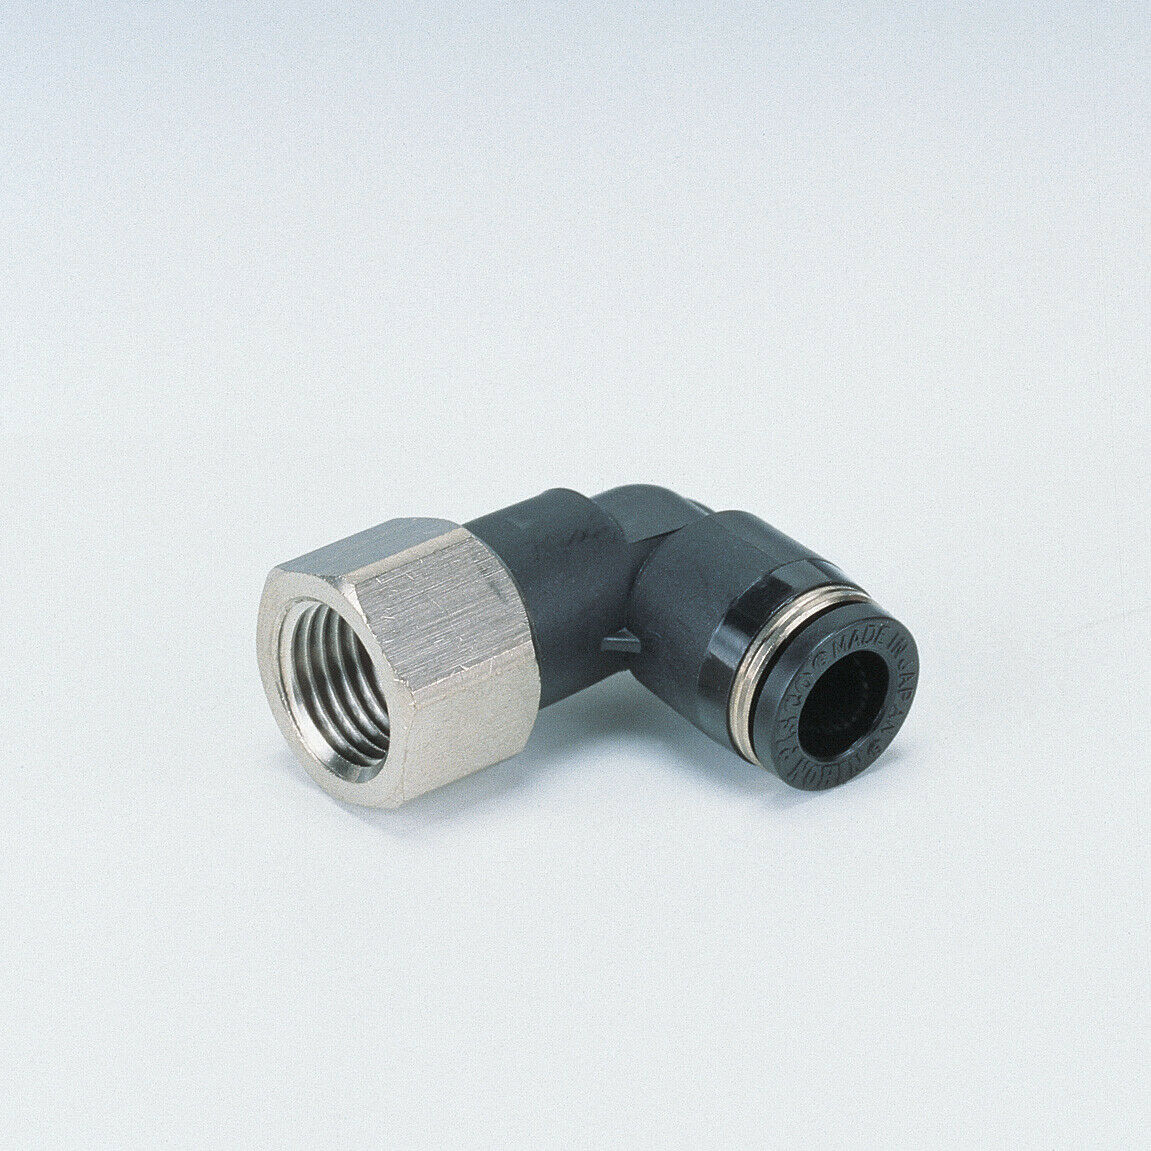 A PISCO Elbow Female Fitting on a white background.